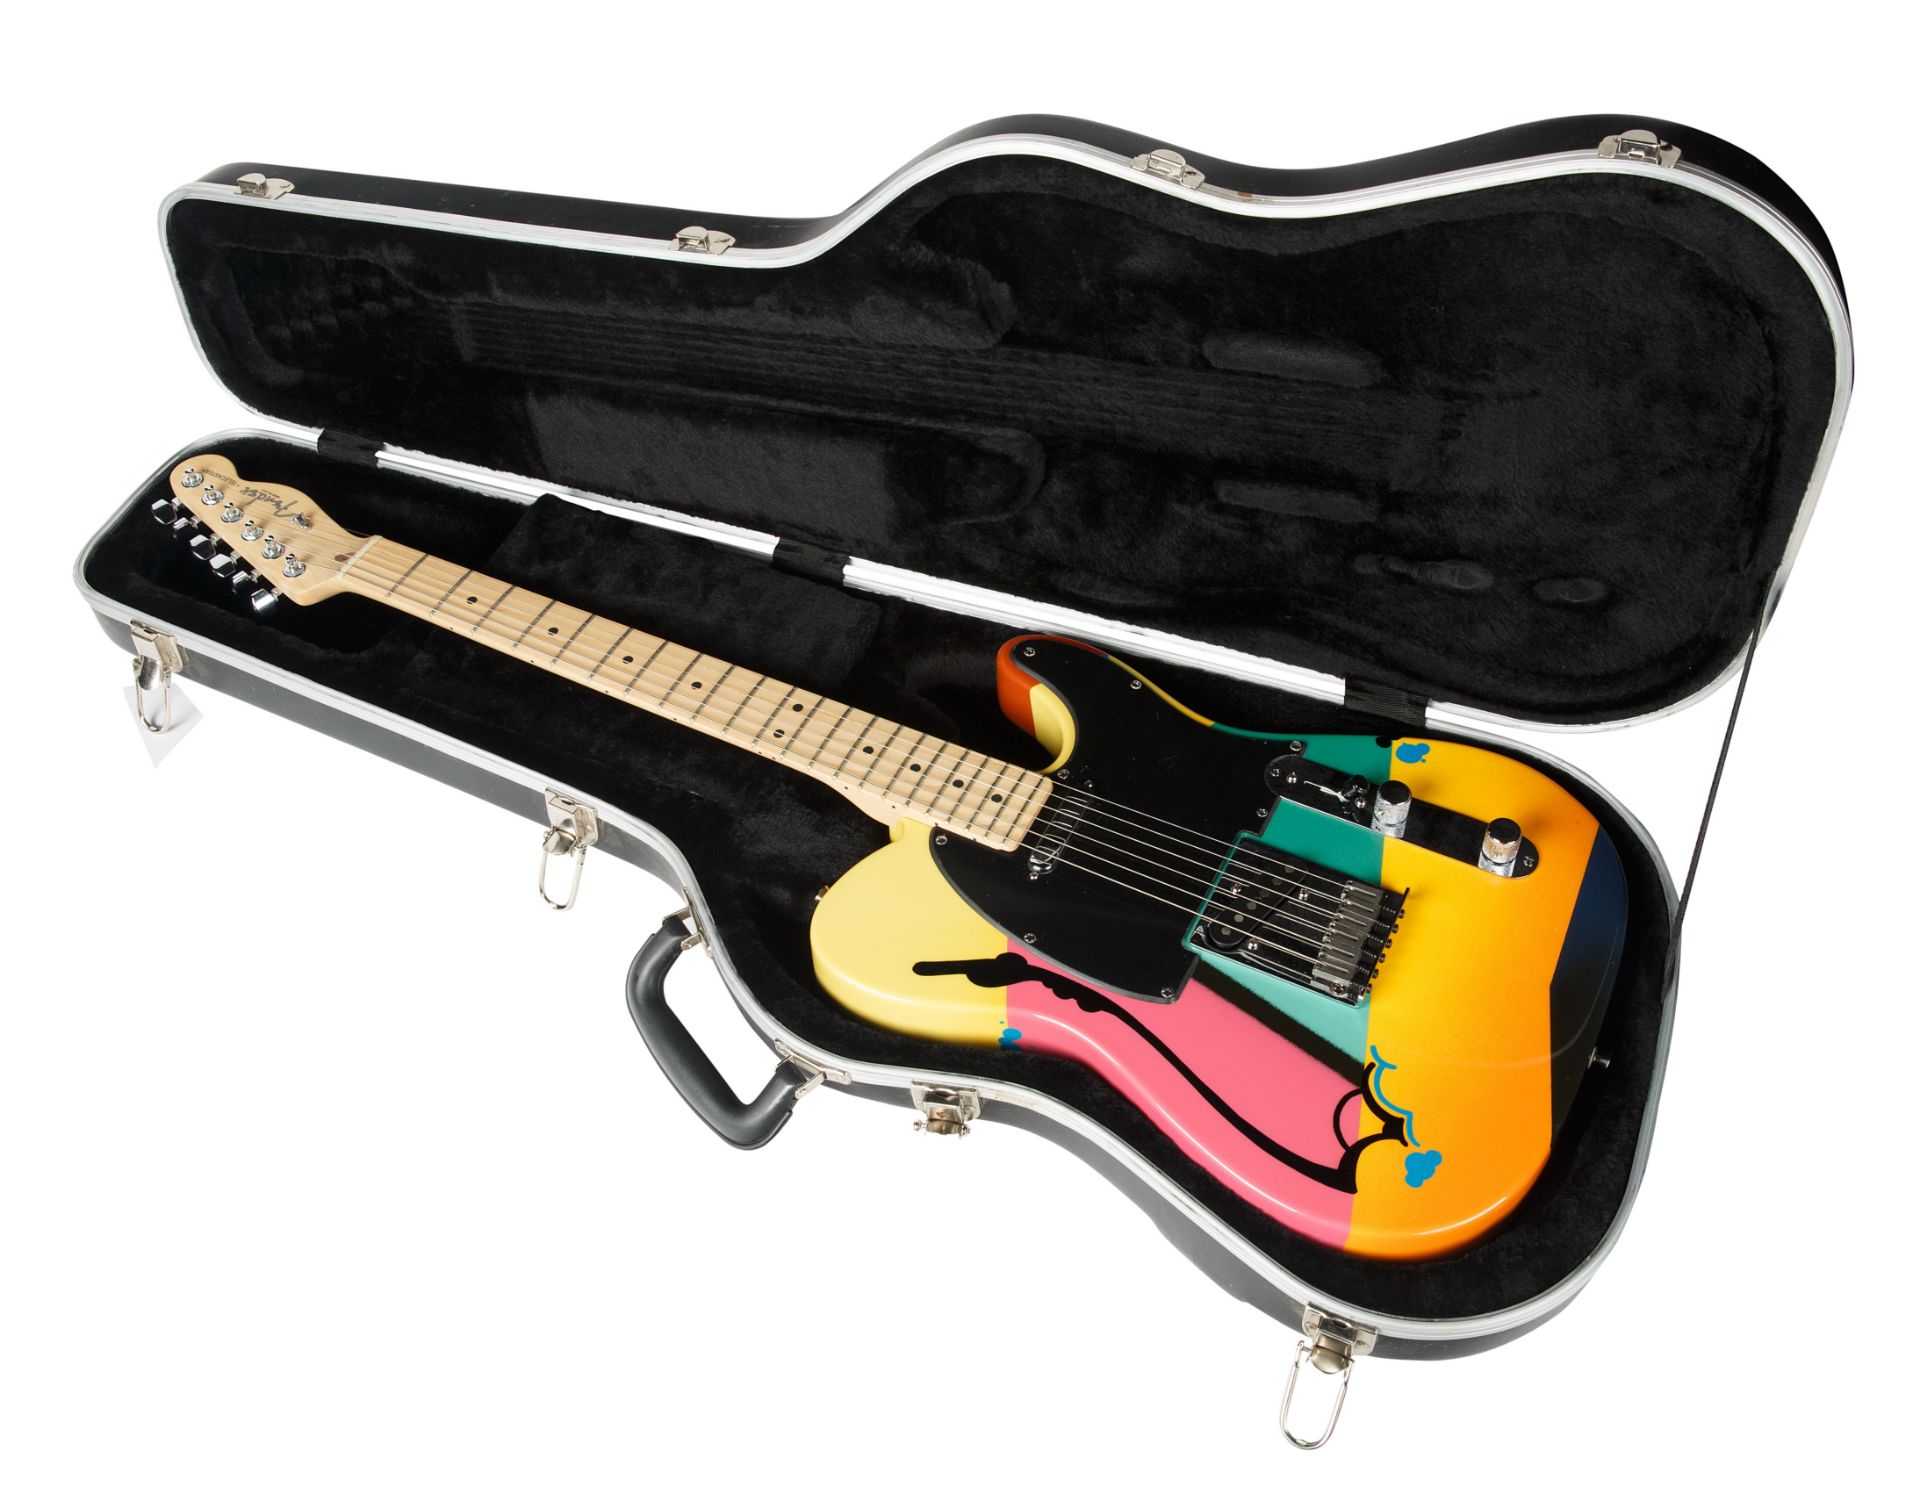 A HAND-PAINTED FENDER TELECASTER BY CRASH [JOHN MATOS] (AMERICAN B. 1961), 2011 - Image 5 of 7